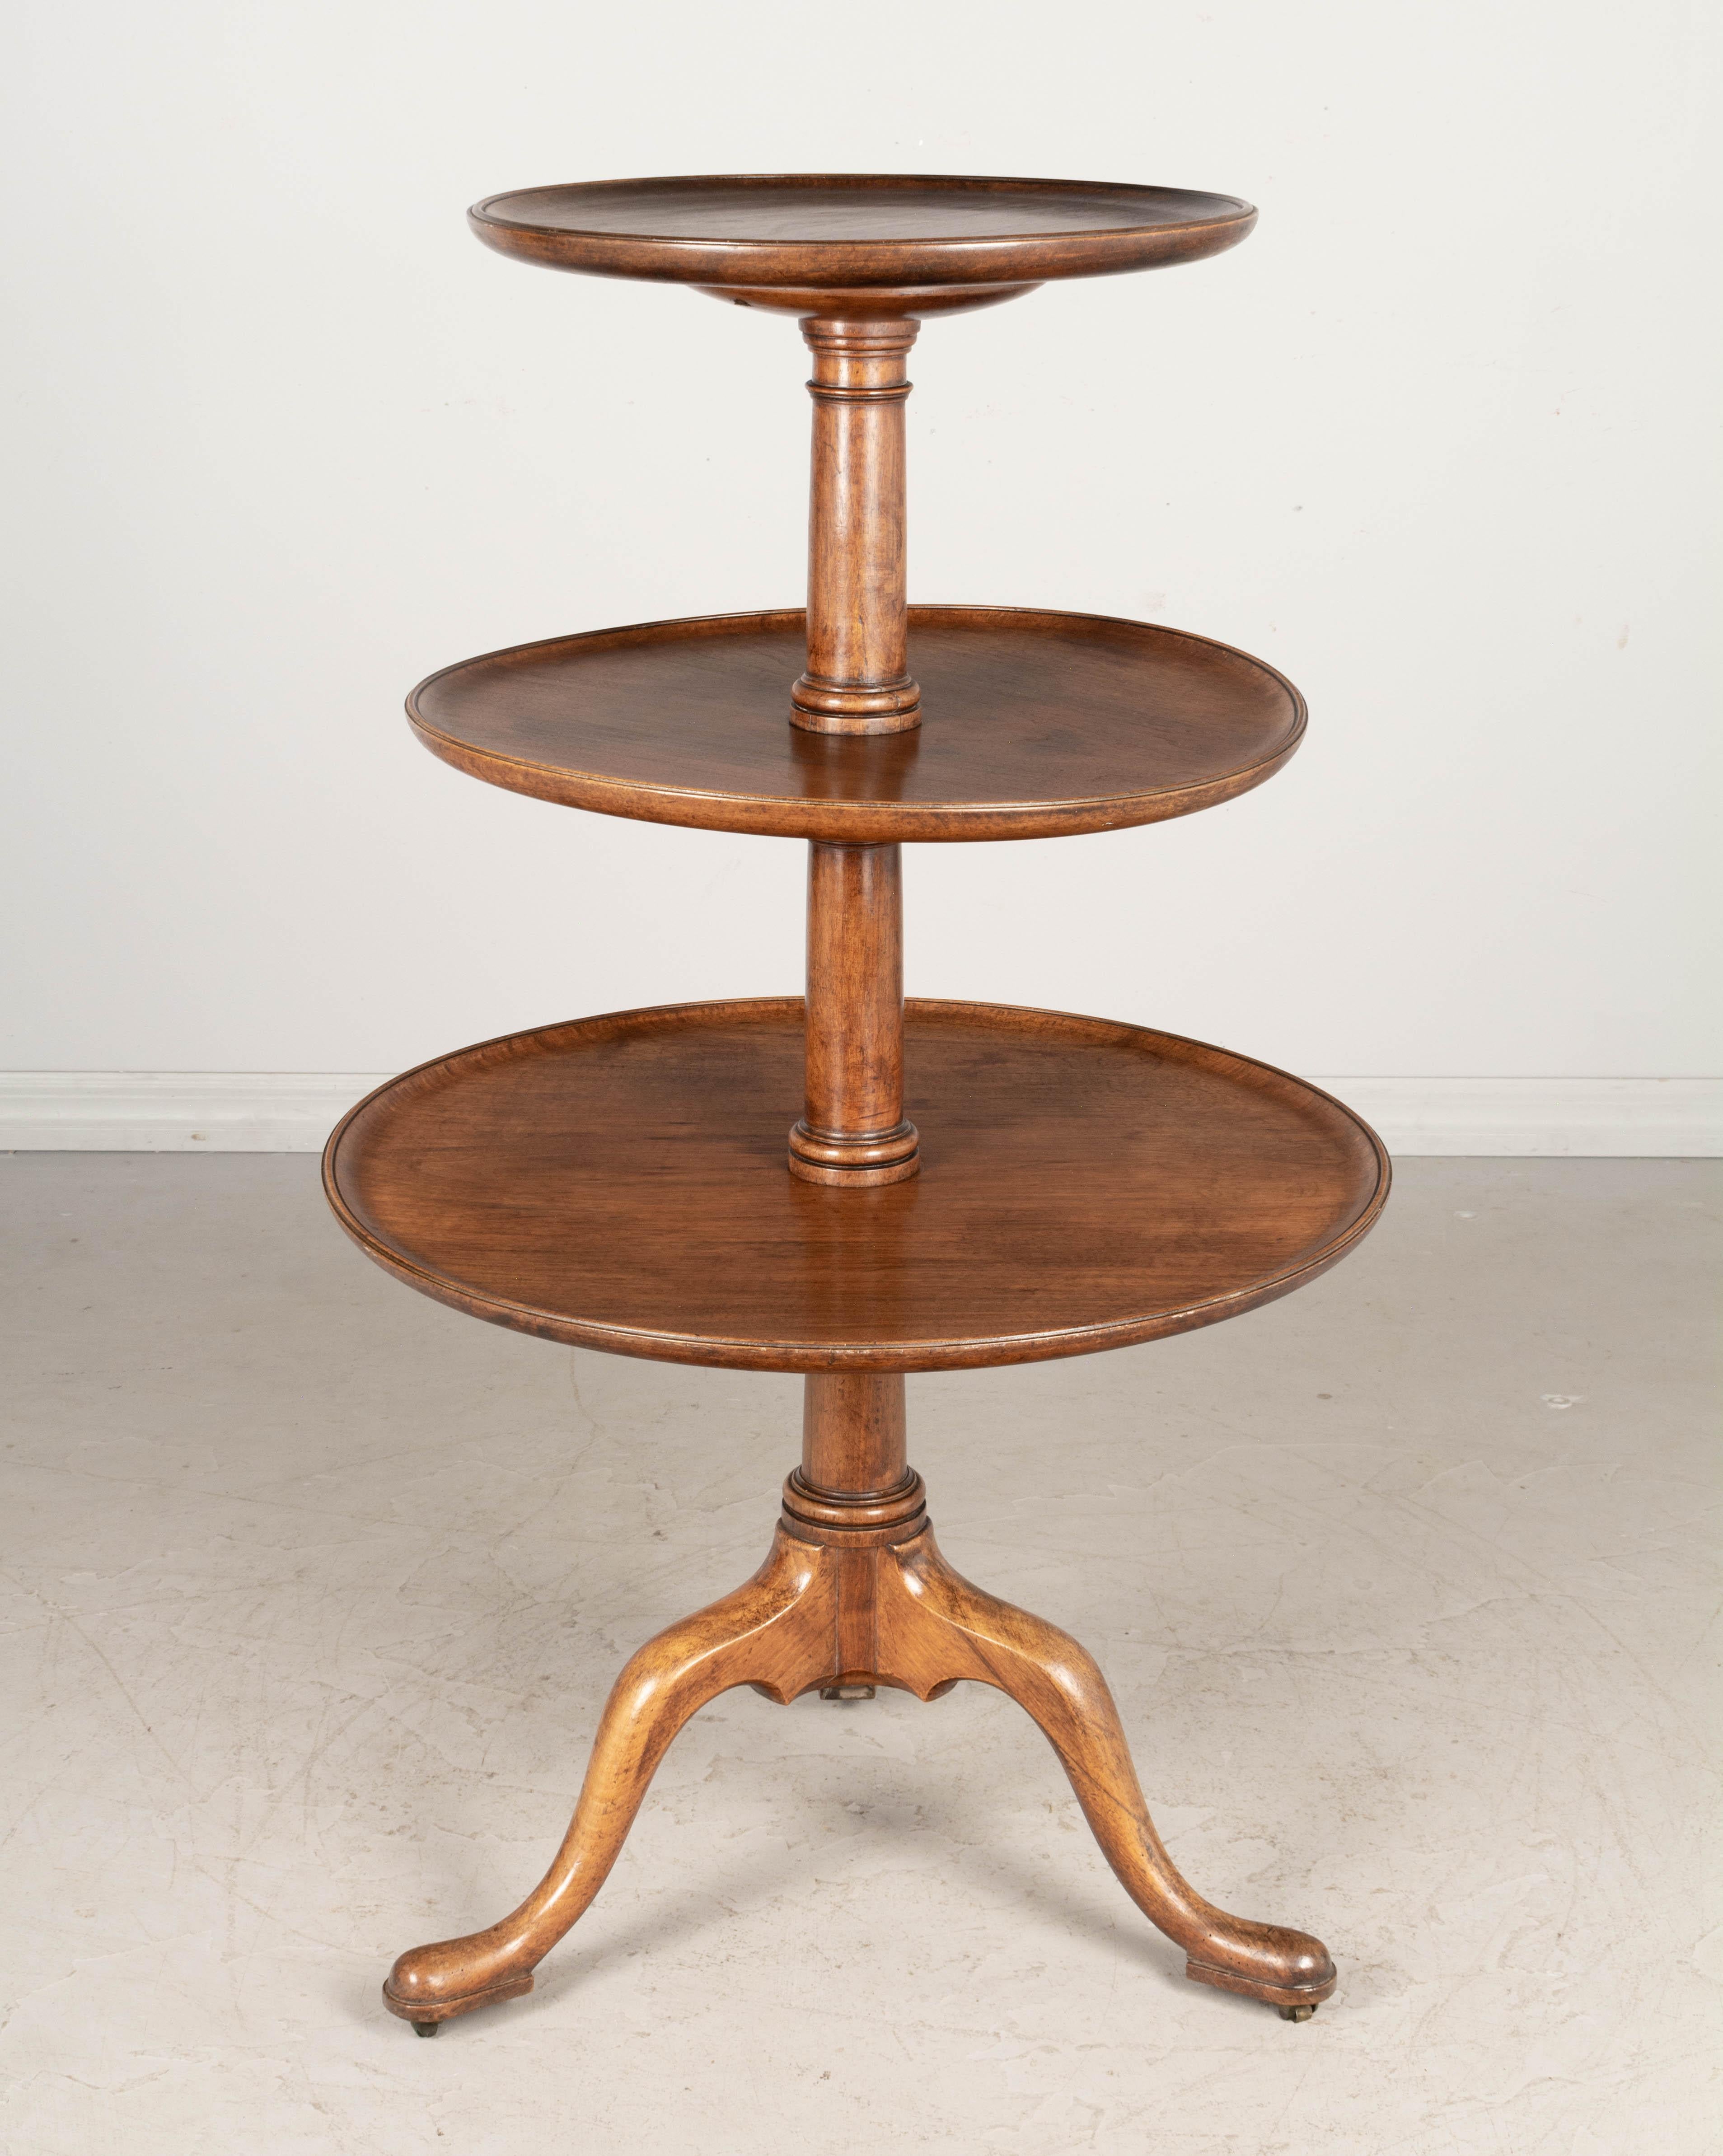 A 19th century French Louis Philippe style three-tier circular stand with turned center pole and tripod base with brass castors. Each shelf, or tray, is made from a single plank of walnut and will be dismantled for shipping. Middle tray is slightly